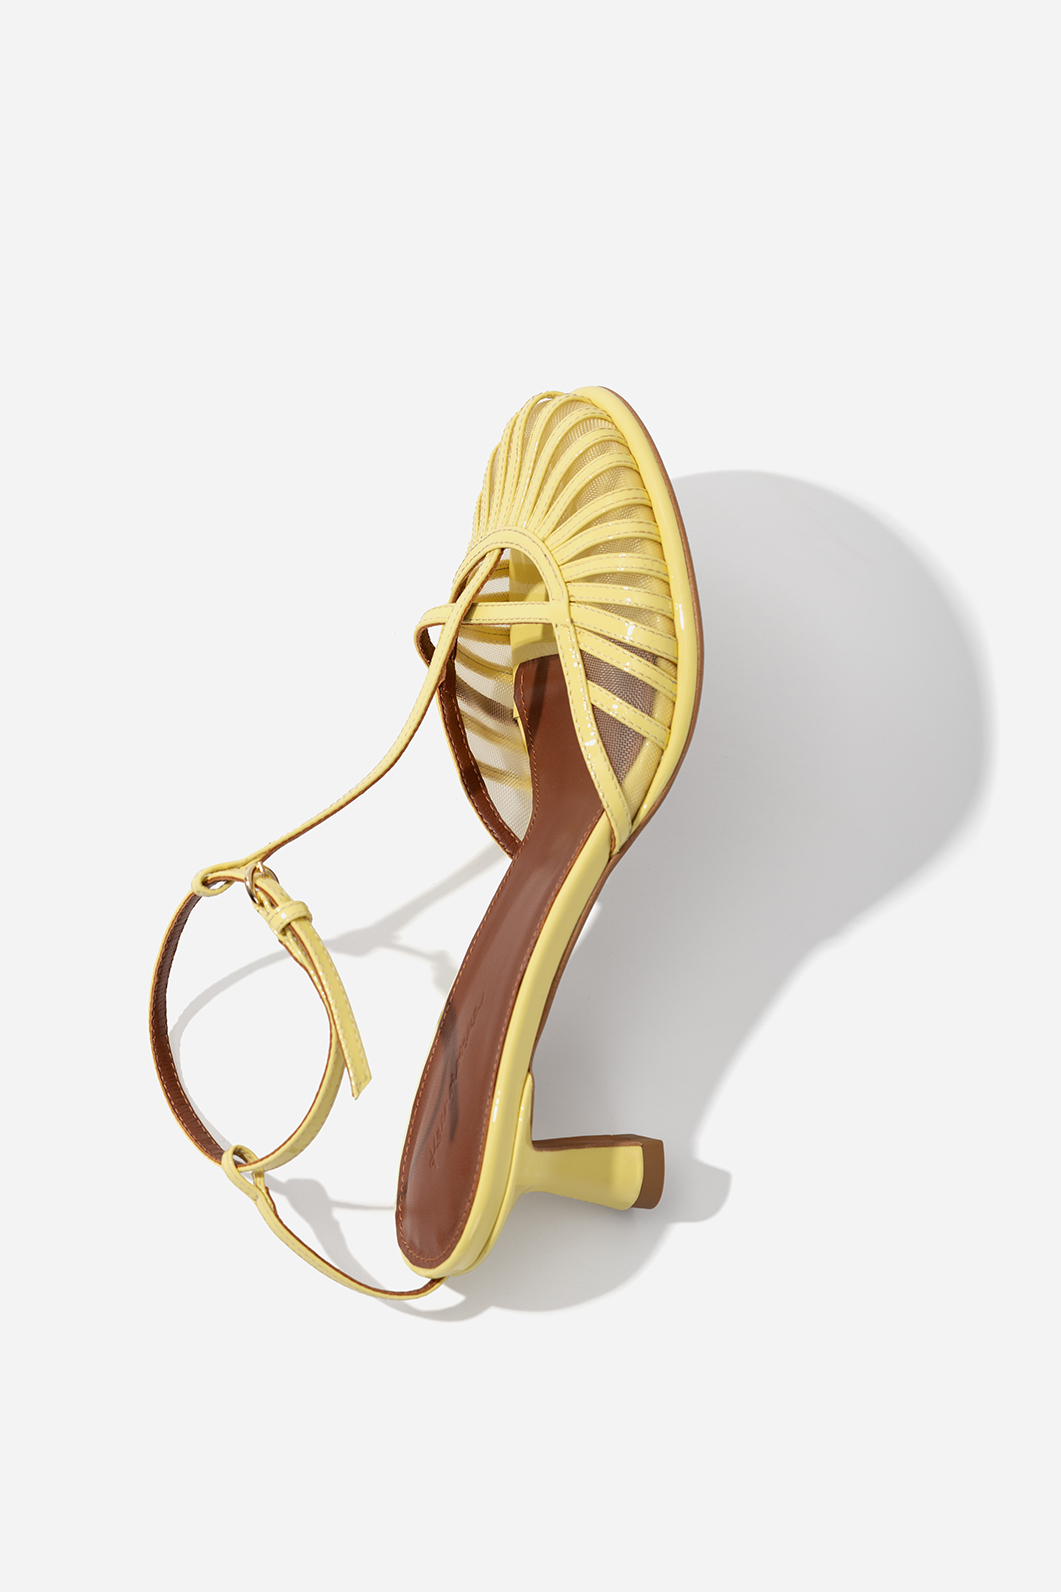 Goldie light yellow patent leather sandals /5 см/